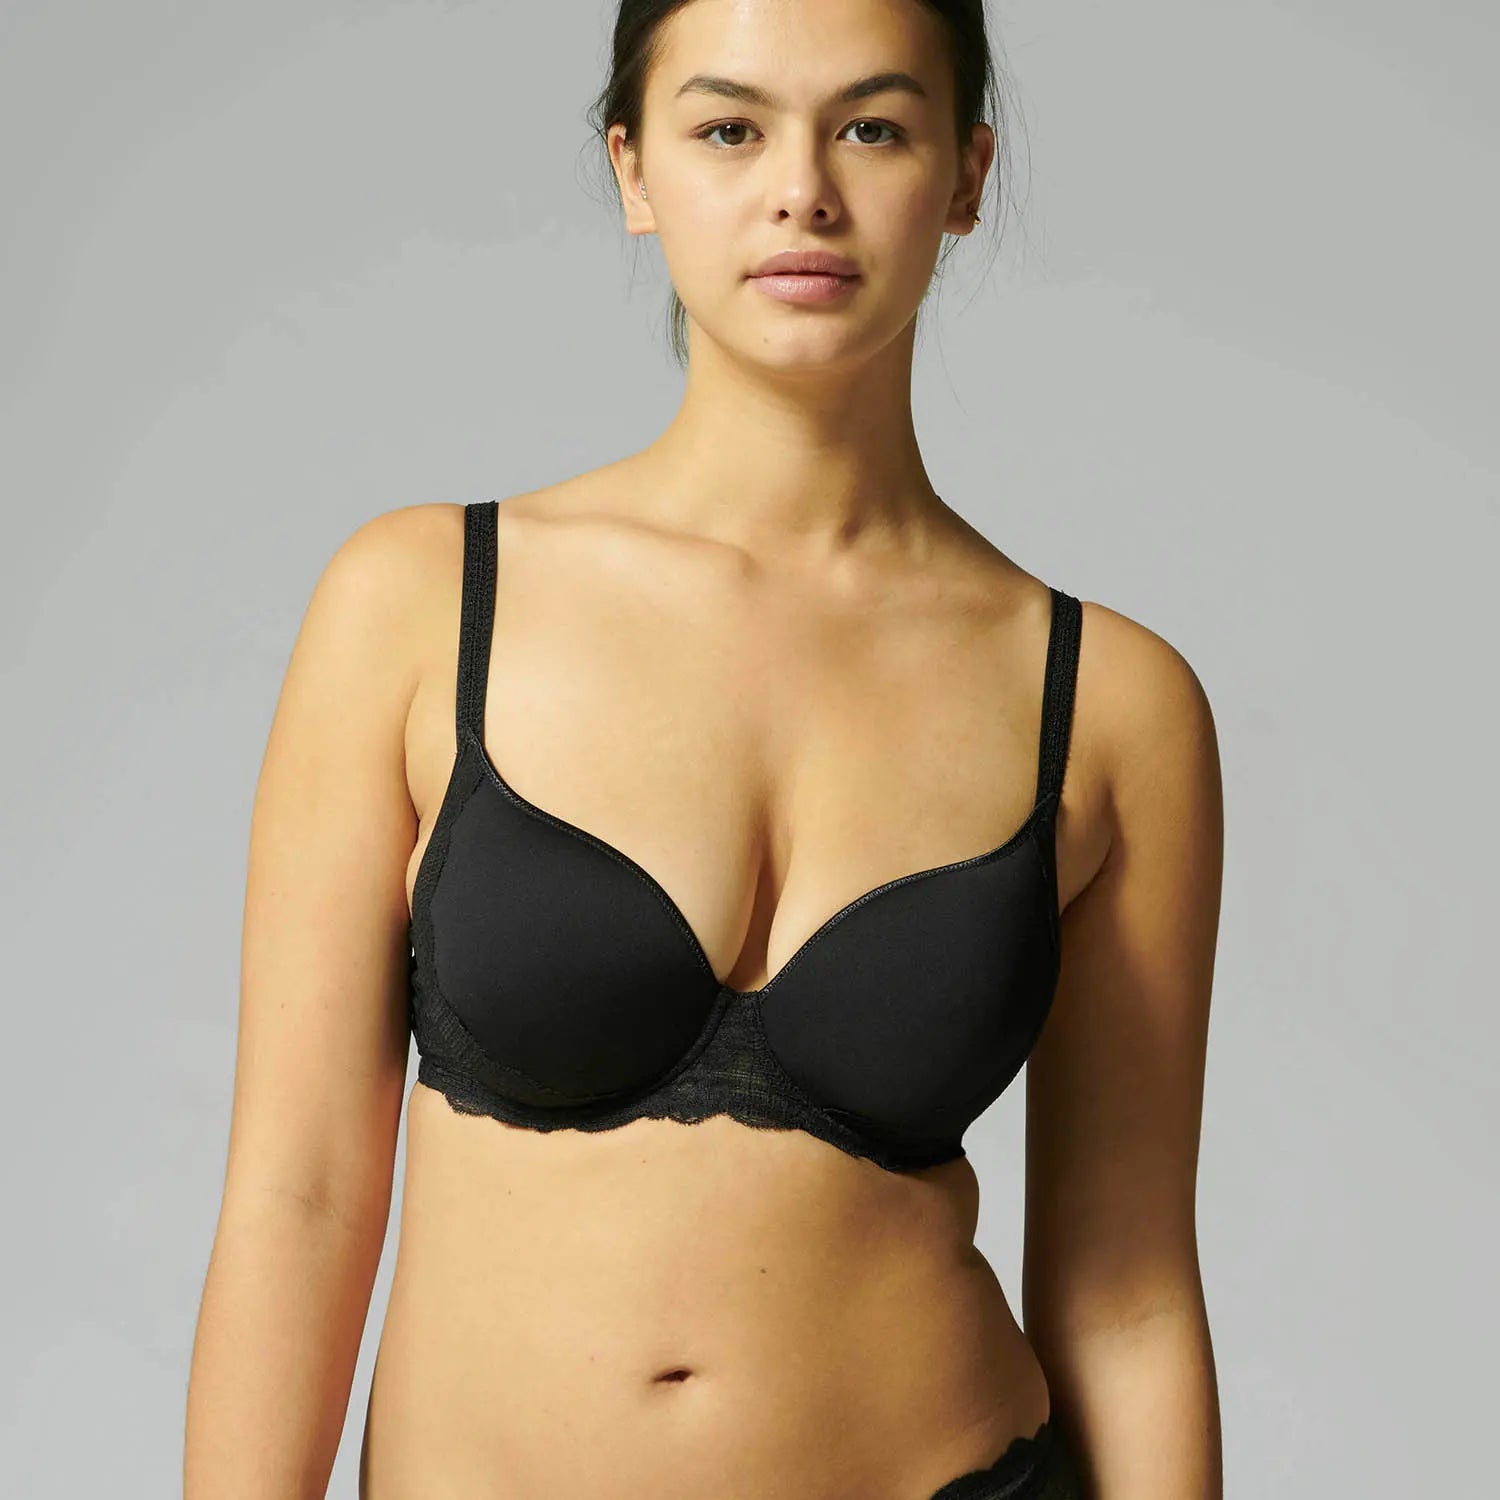 30G Bra Size in Black Contour, Seamless and Spacer Bras